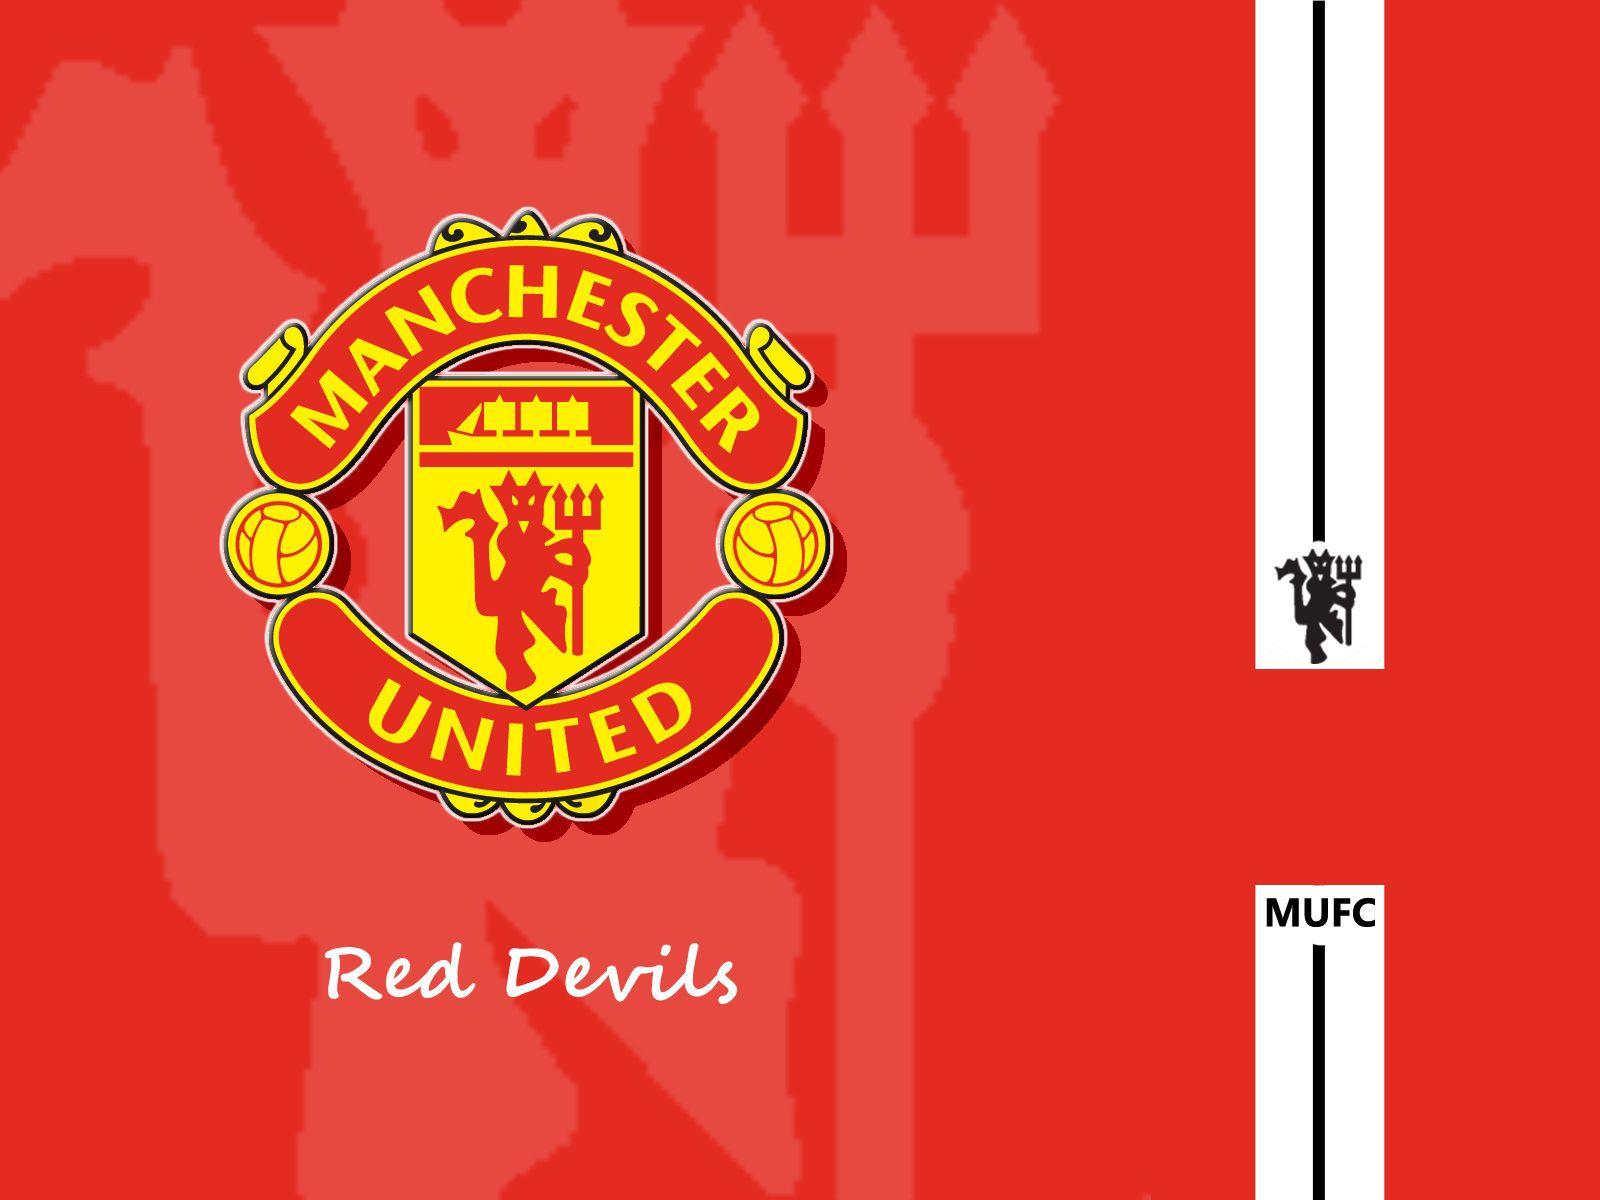 Manchester United Red Devils Wallpaper: Players, Teams, Leagues